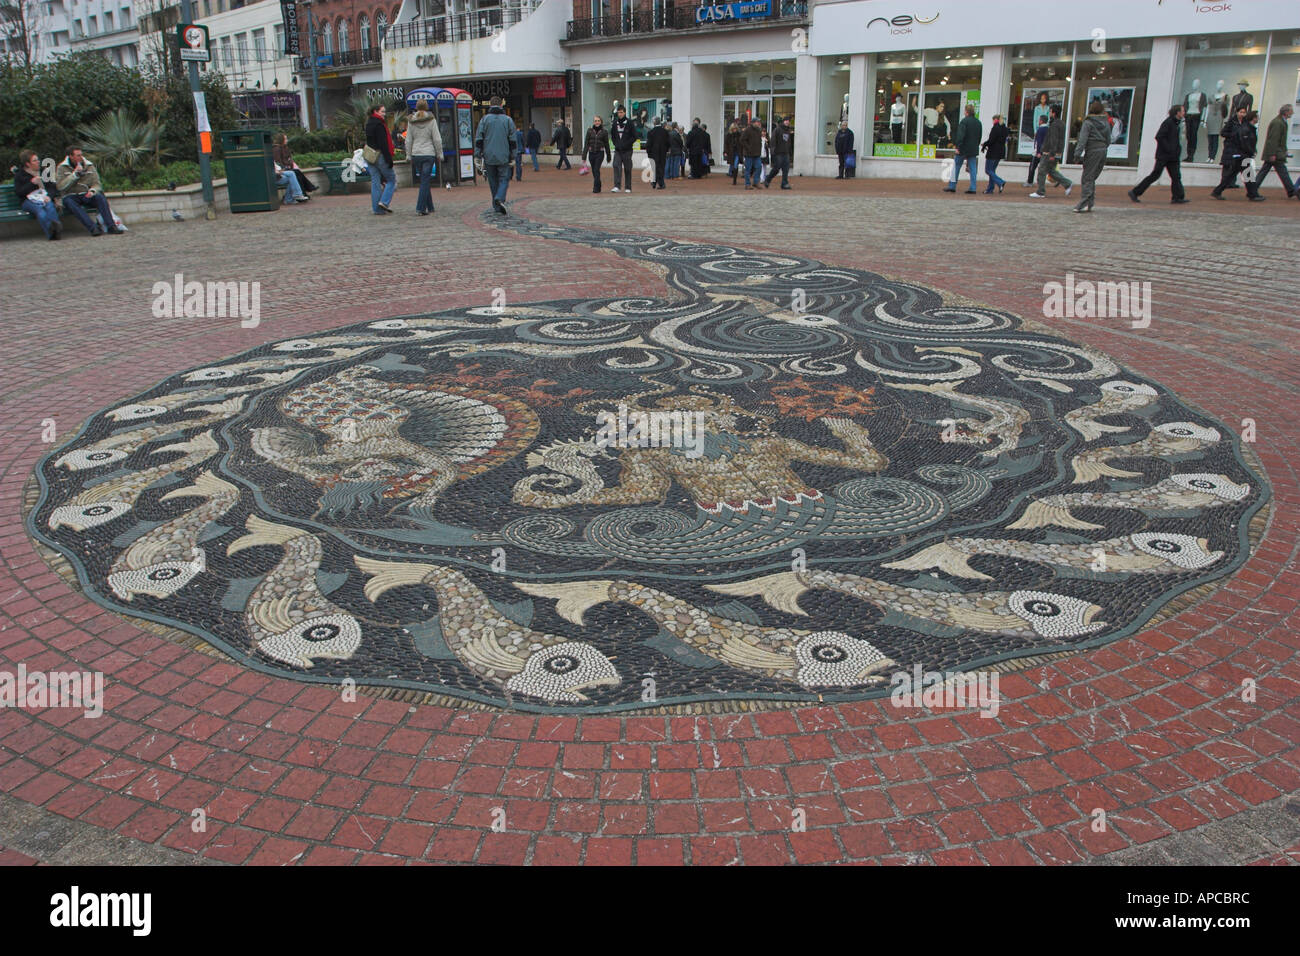 Large pebble mosaic by Maggie Howarth in The Square Bournemouth It has an appropriate seaside theme Stock Photo